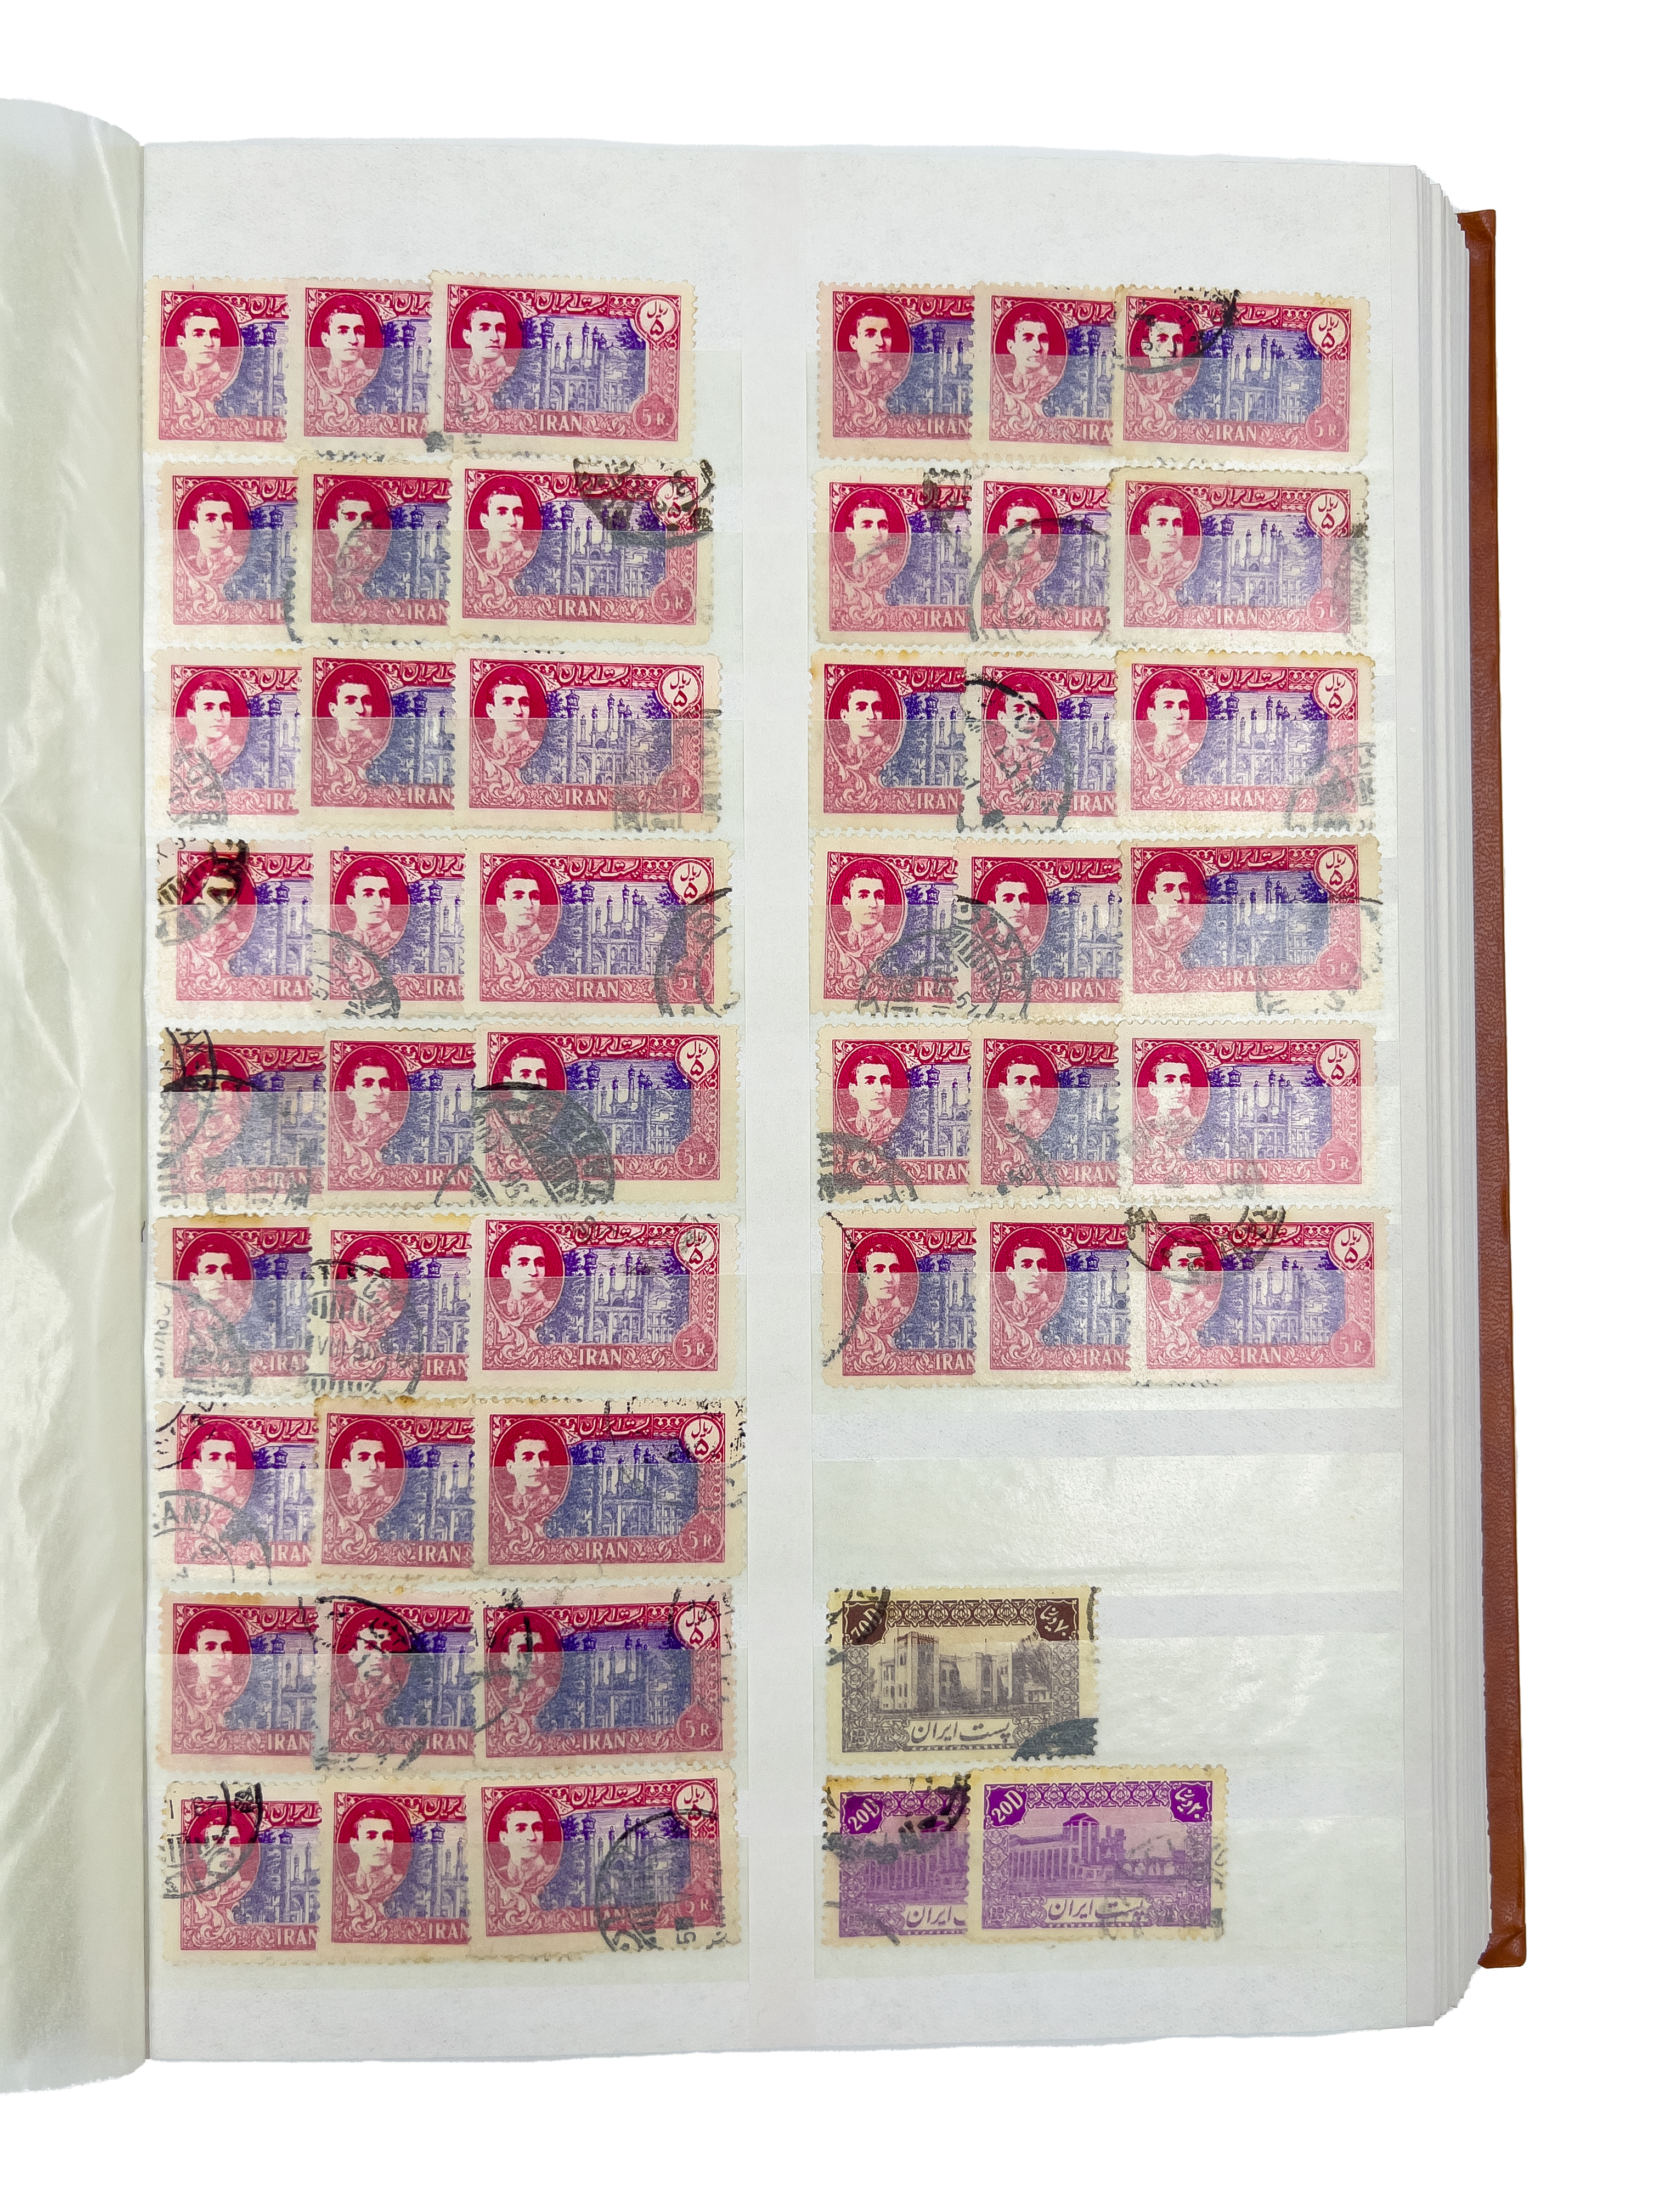 RARE & EXTENSIVE COLLECTION OF PERSIAN PAHLAVI POST STAMPS - Image 44 of 63